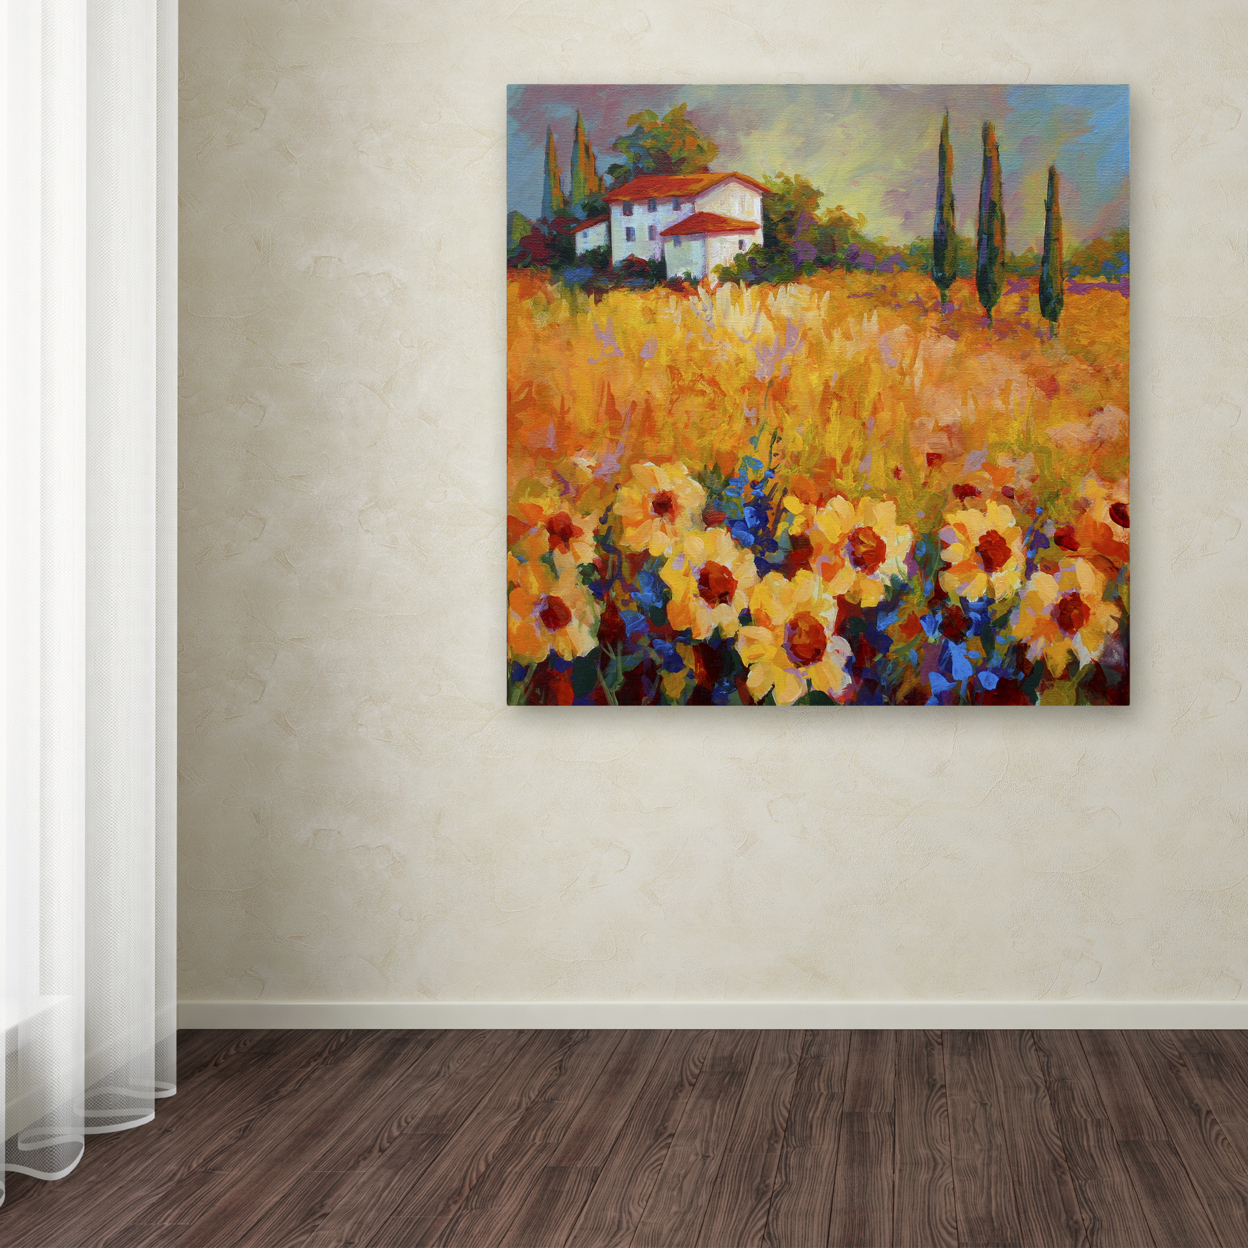 Marion Rose 'Tuscan Sunflowers' Ready To Hang Canvas Art 18 X 18 Inches Made In USA